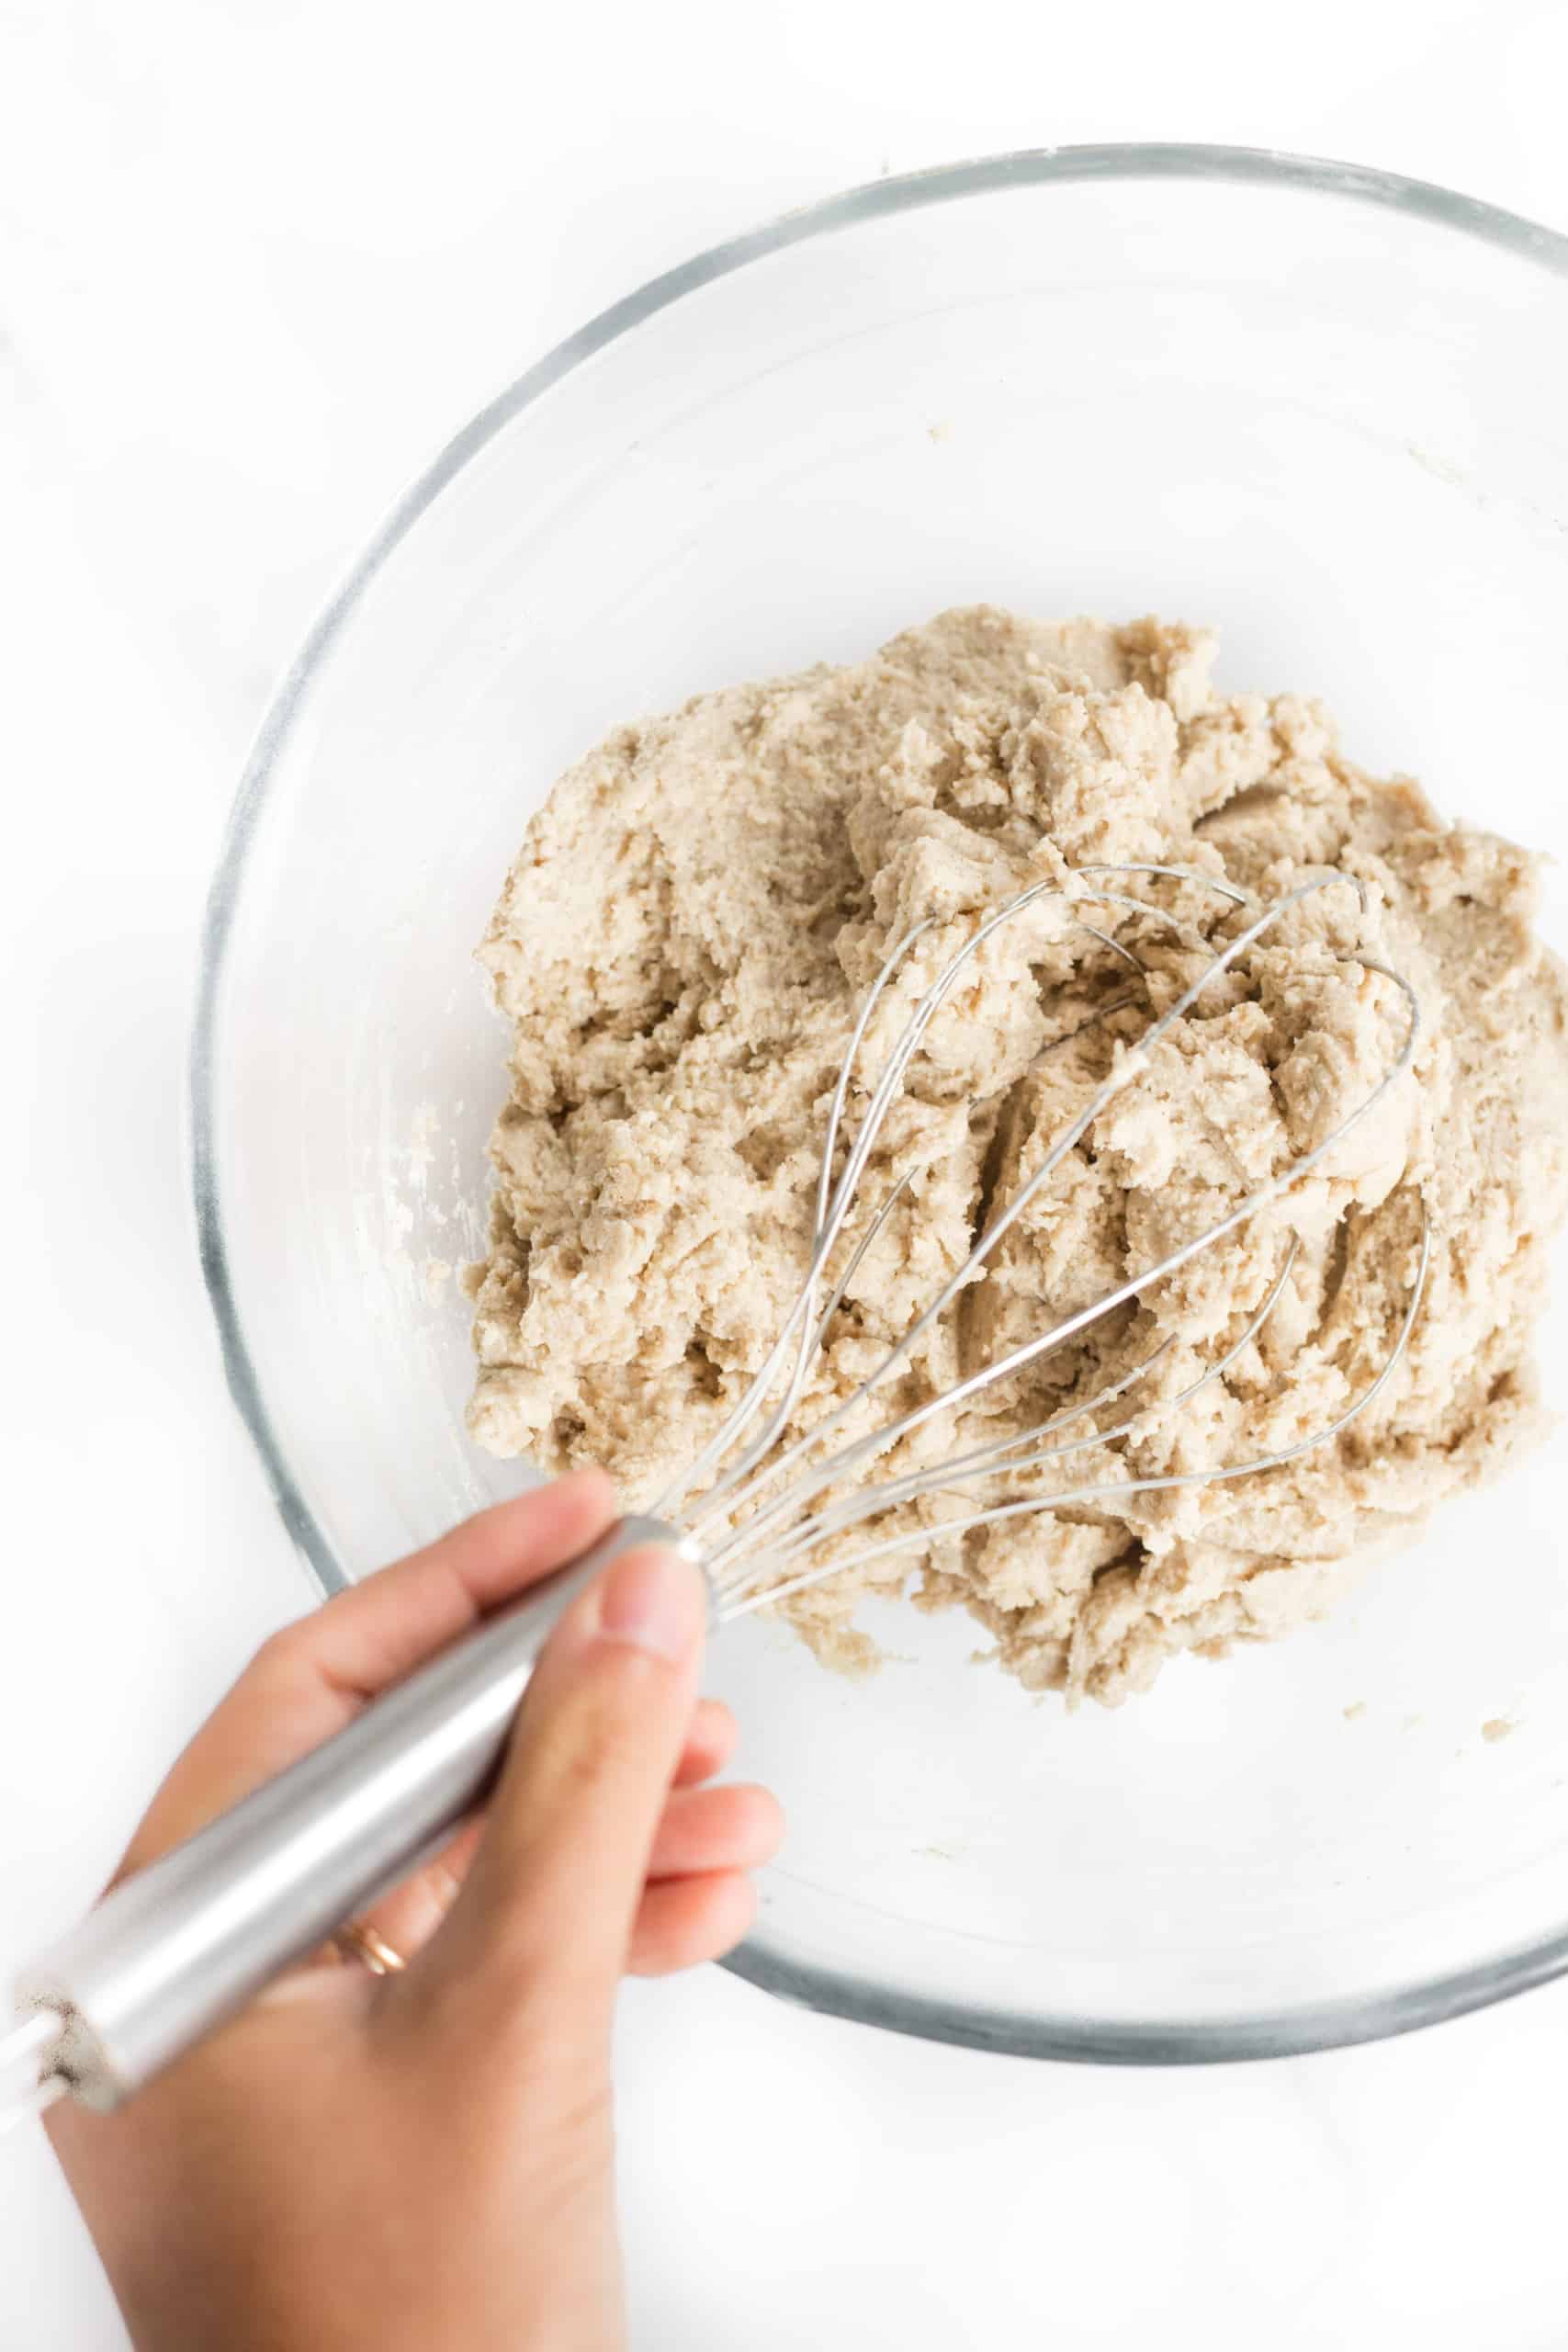 Mixing gluten-free whole grain bread dough in large glass bowl.